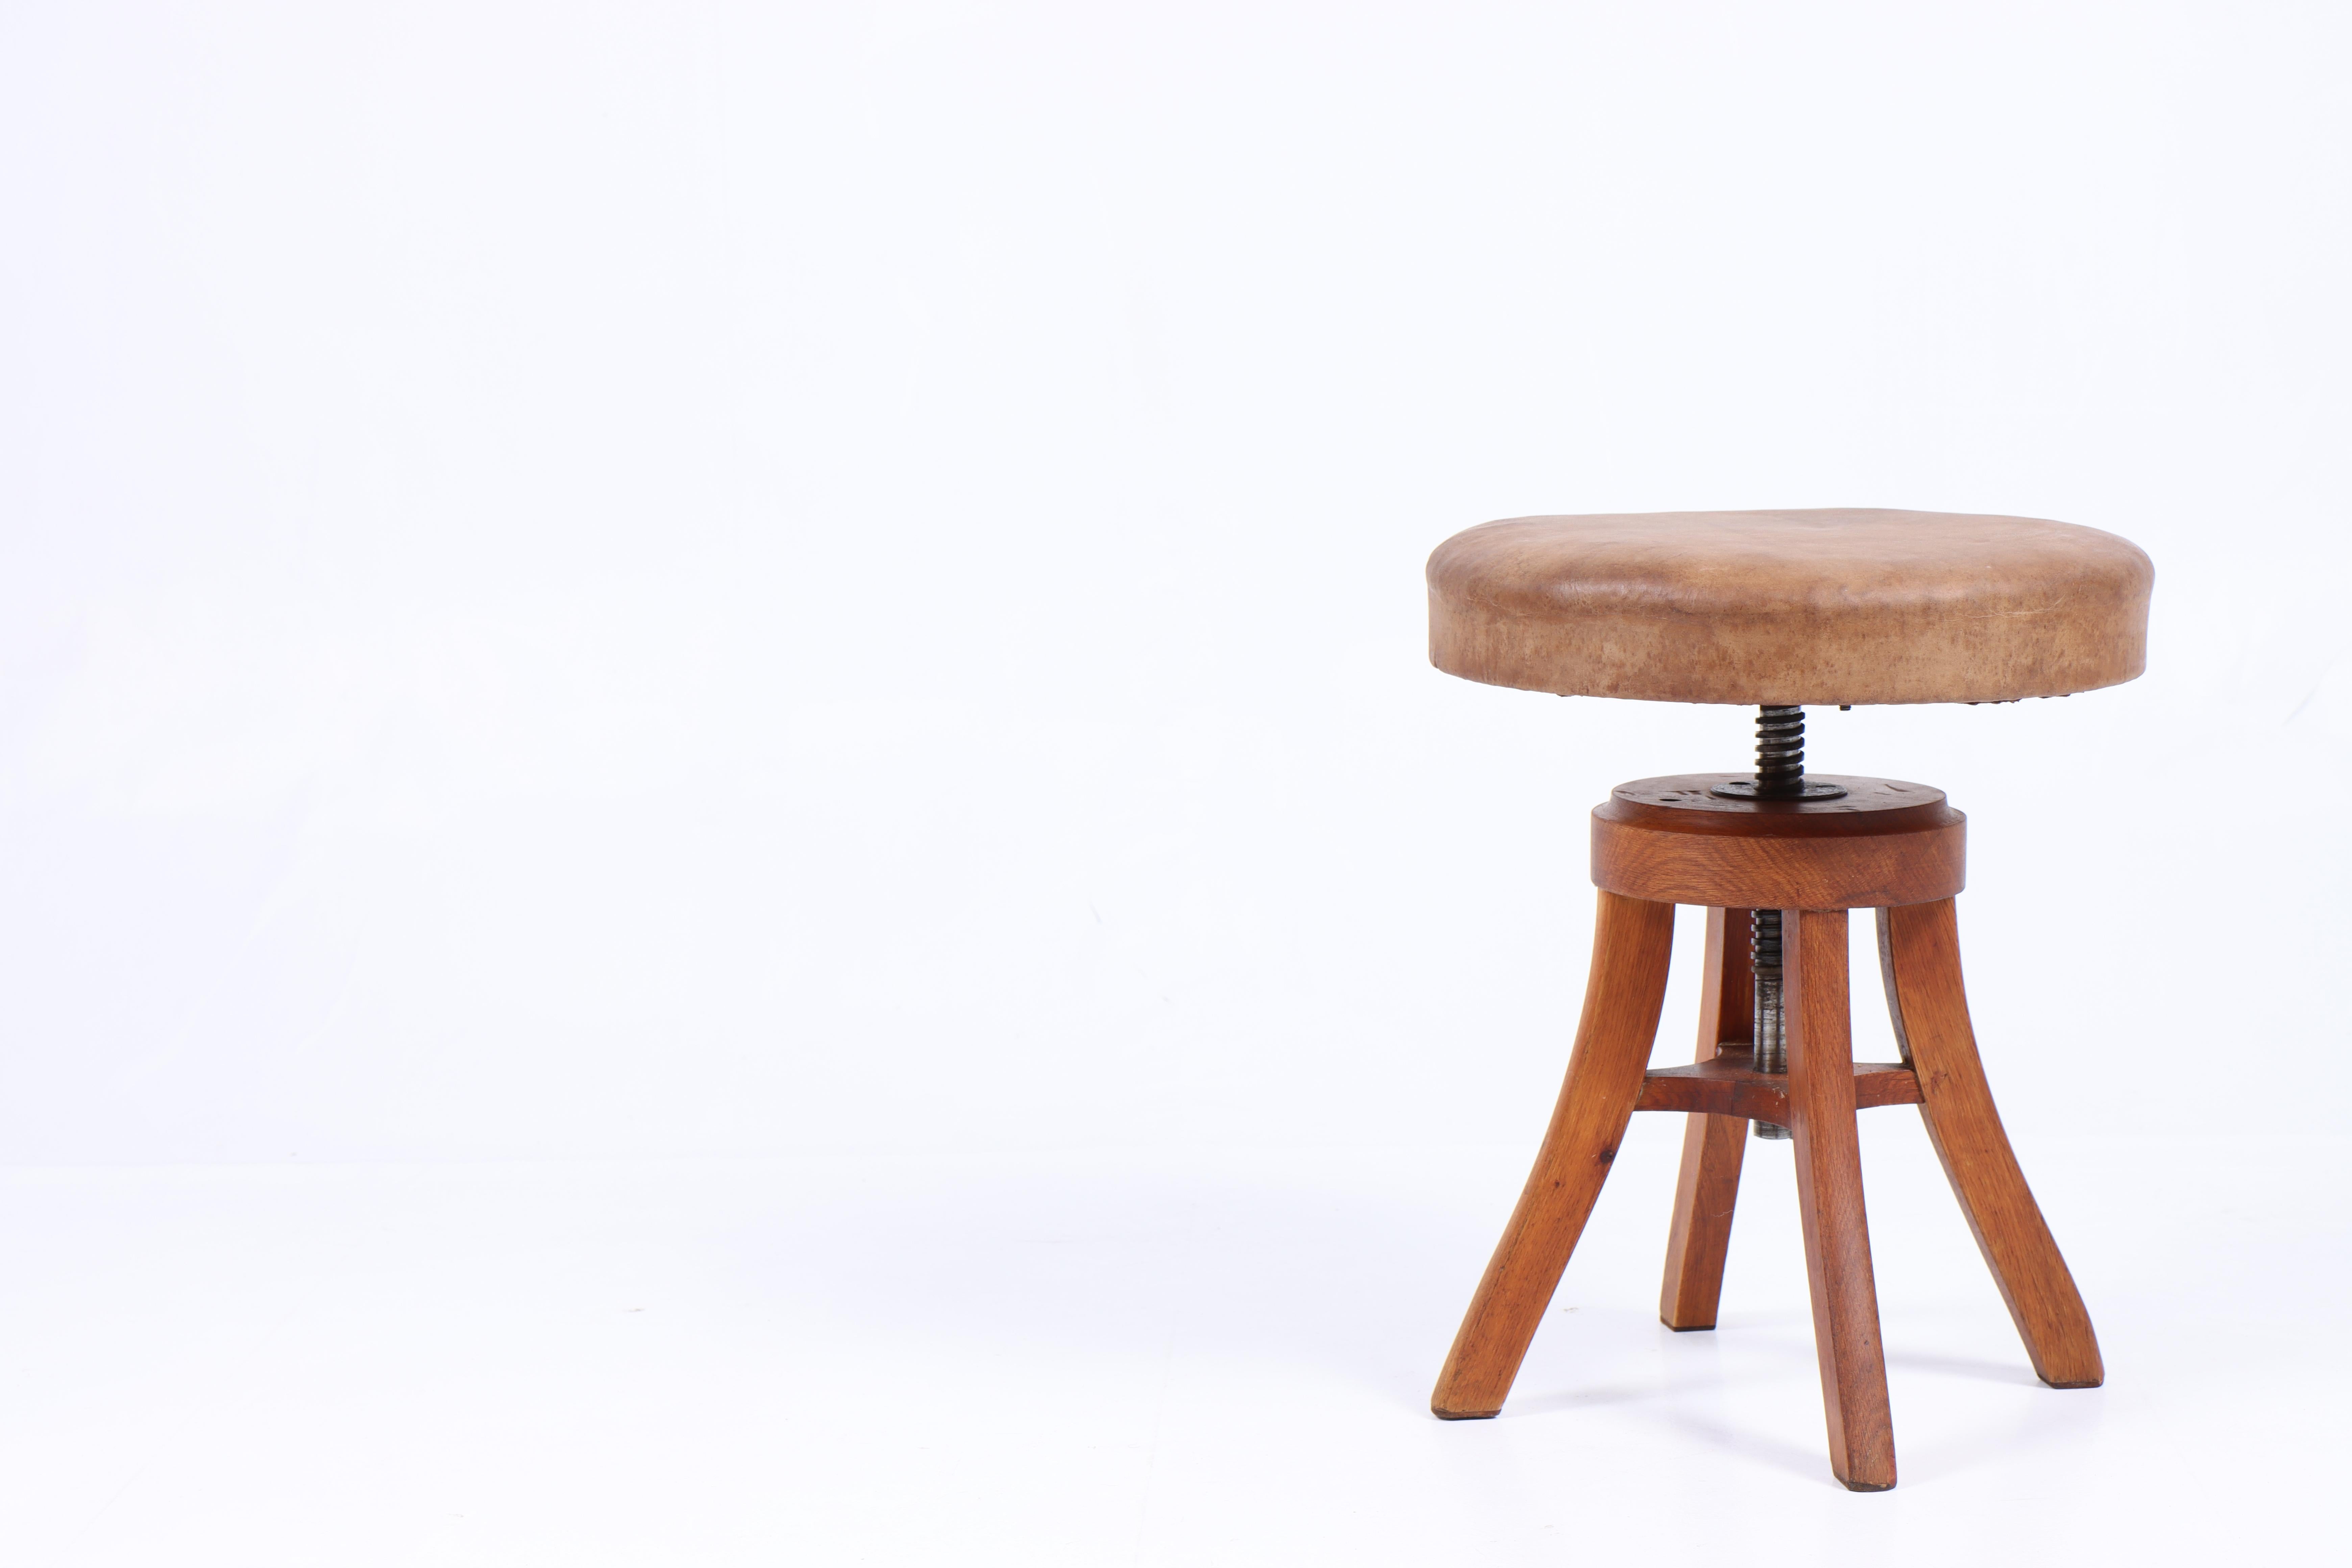 Mid-20th Century Adjustable Artist Stool in Oak and Patinated Leather, Denmark, 1930s For Sale